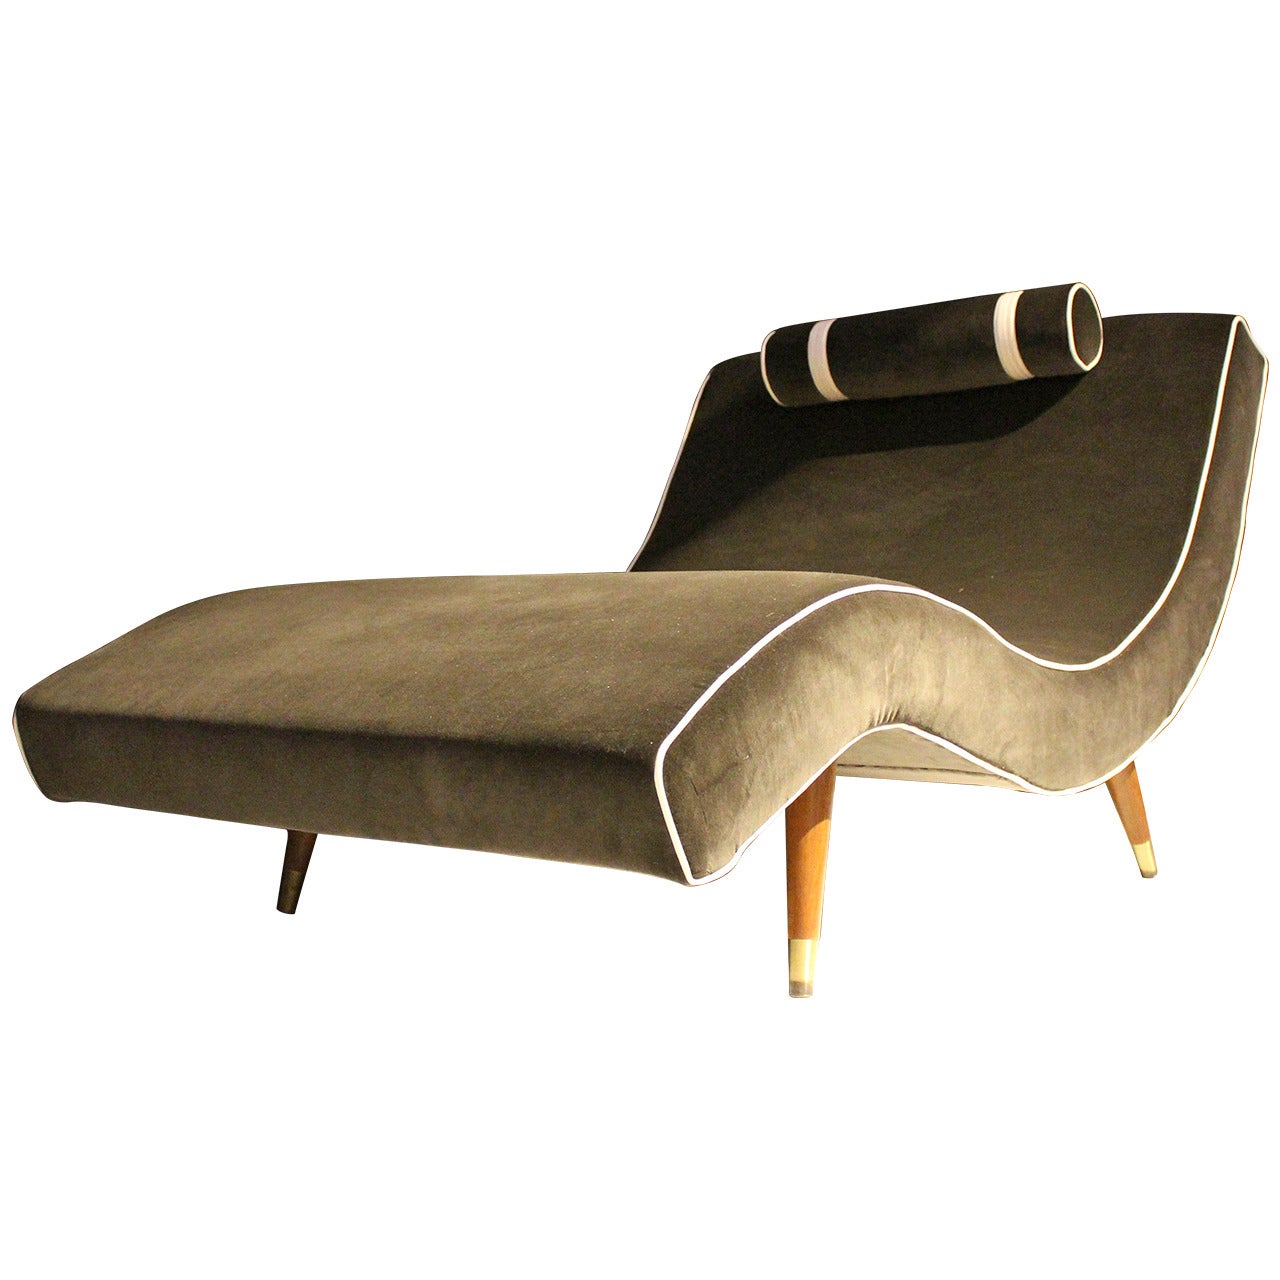 "Wave Chaise" Lounge Chair by Adrian Pearsall, Model # 2147-CL, circa 1960